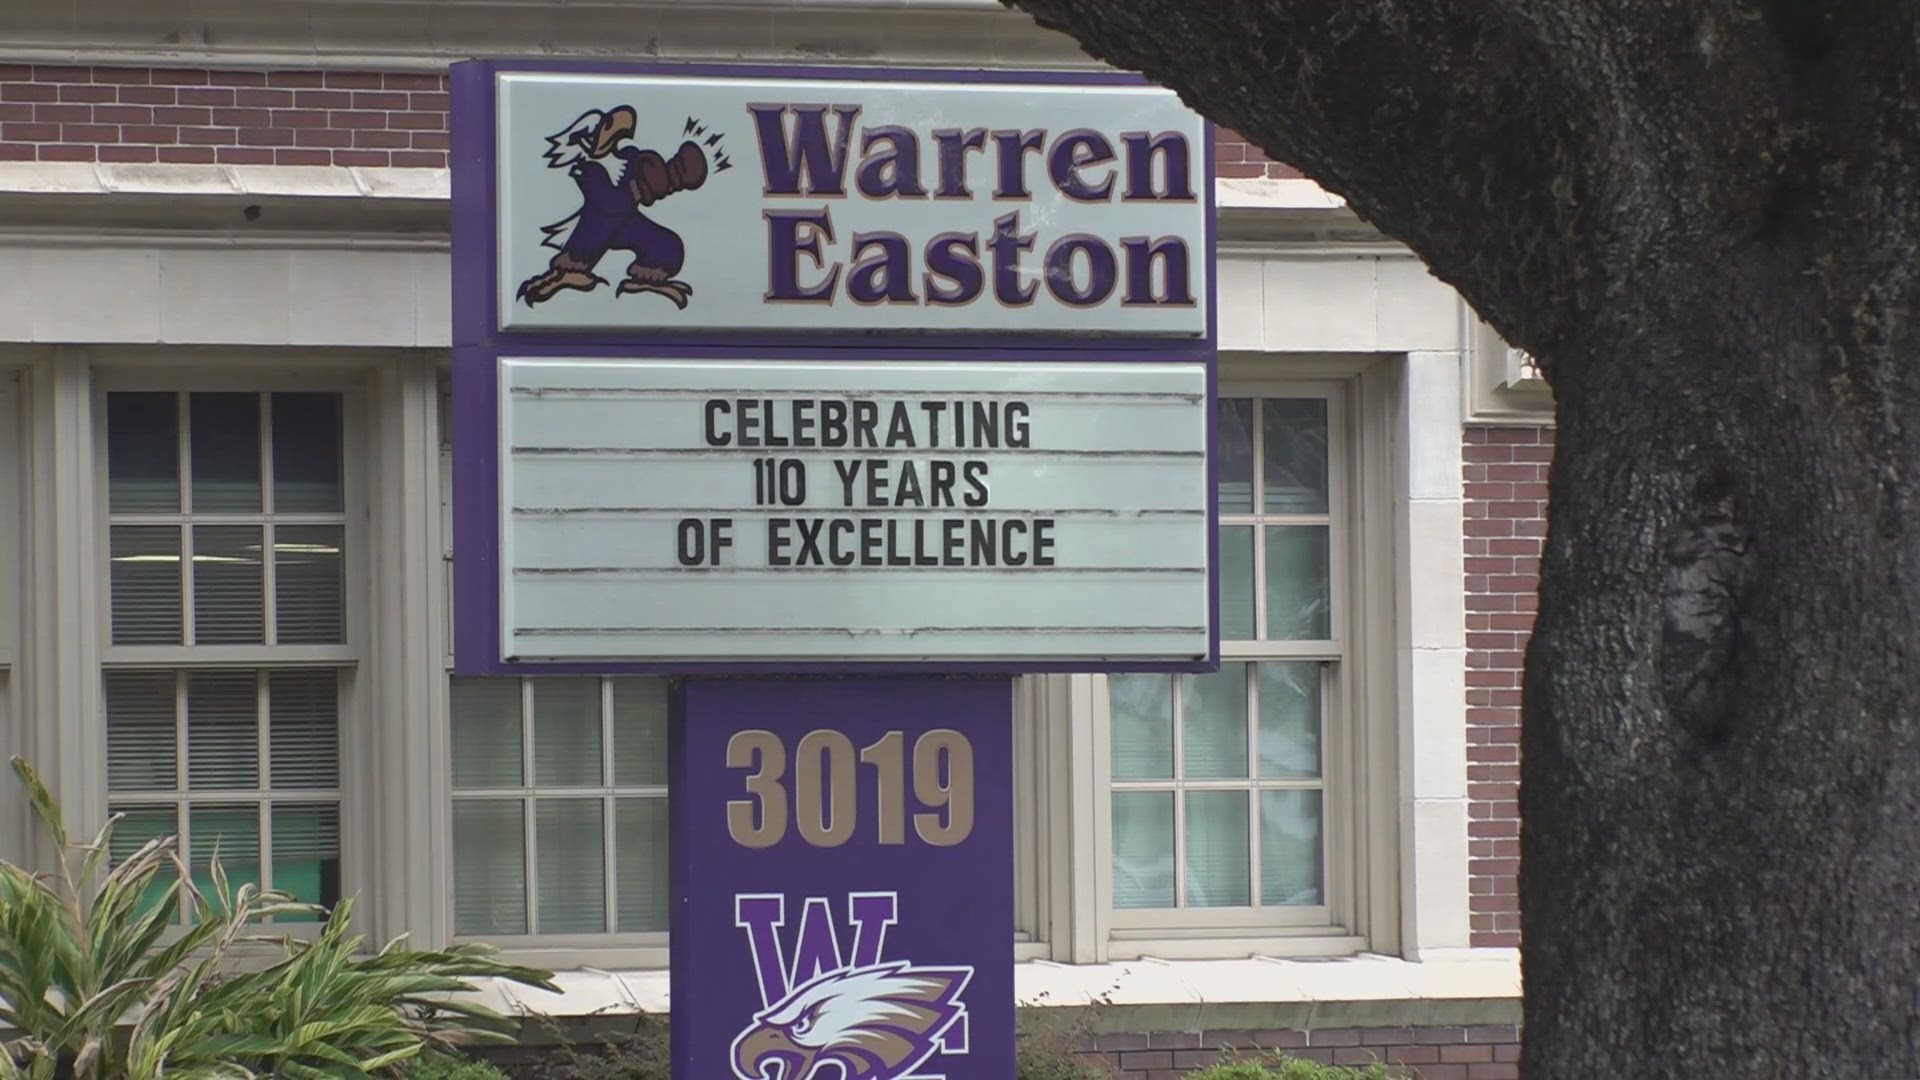 New Teacher Student Hd 3xxxx Video - 3 students charged with simple battery after fight with teacher at Warren  Easton | wwltv.com